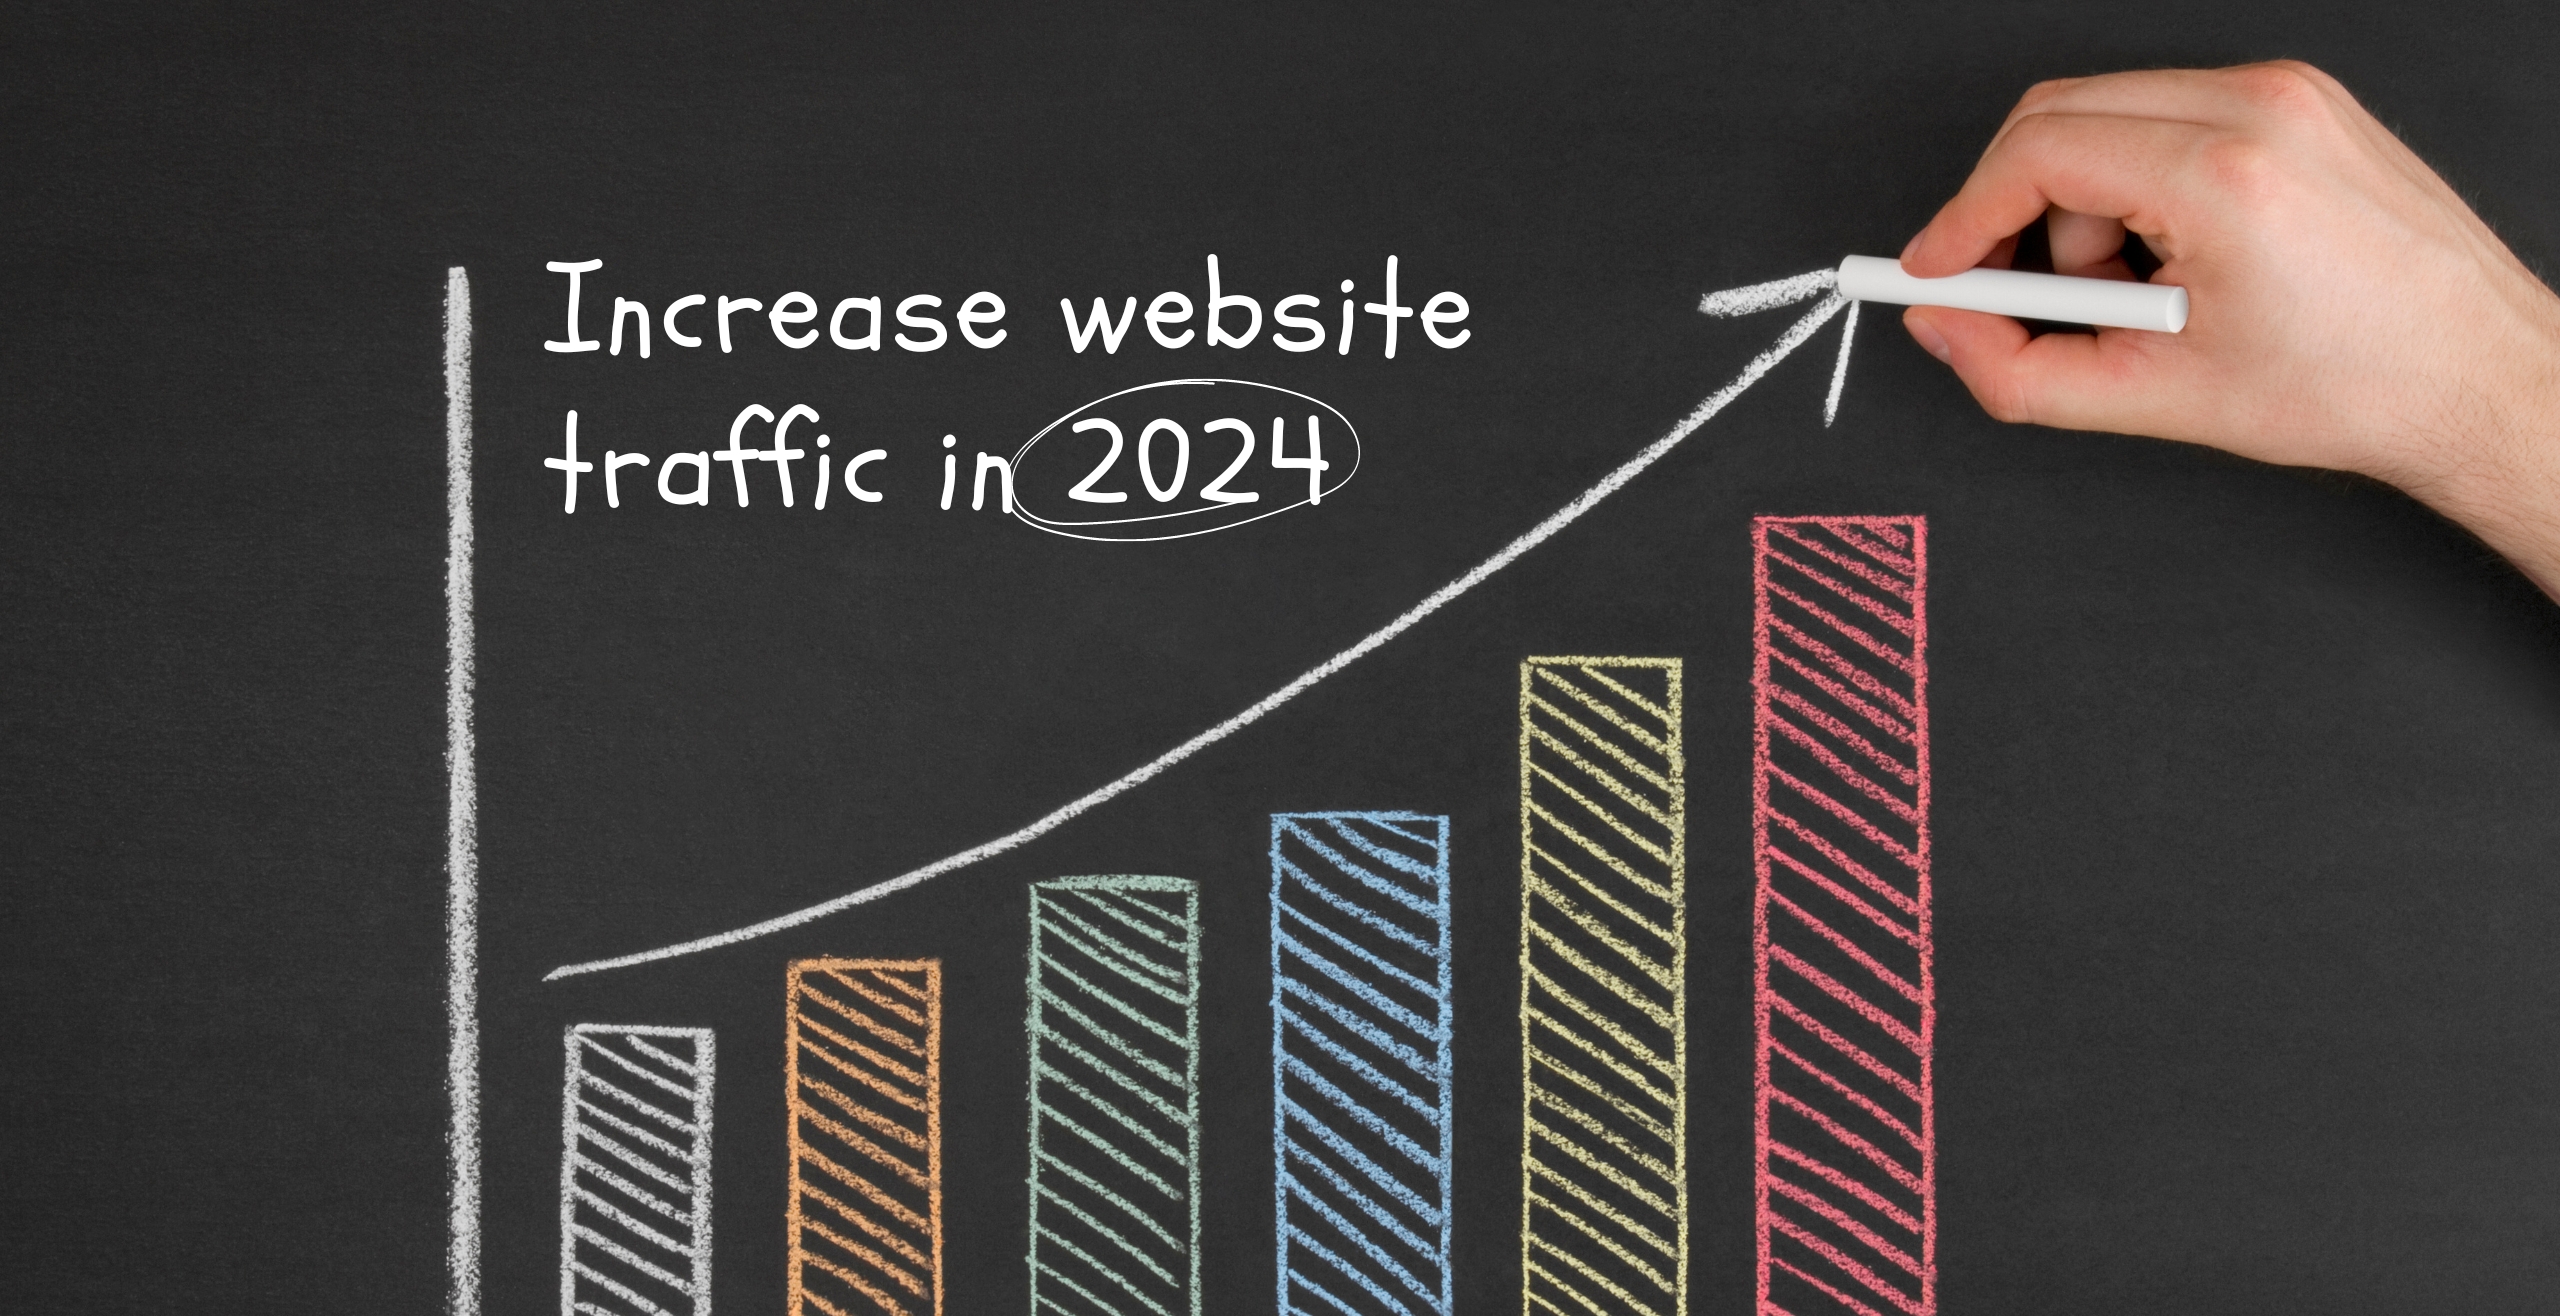 How to increase organic traffic in 2024?